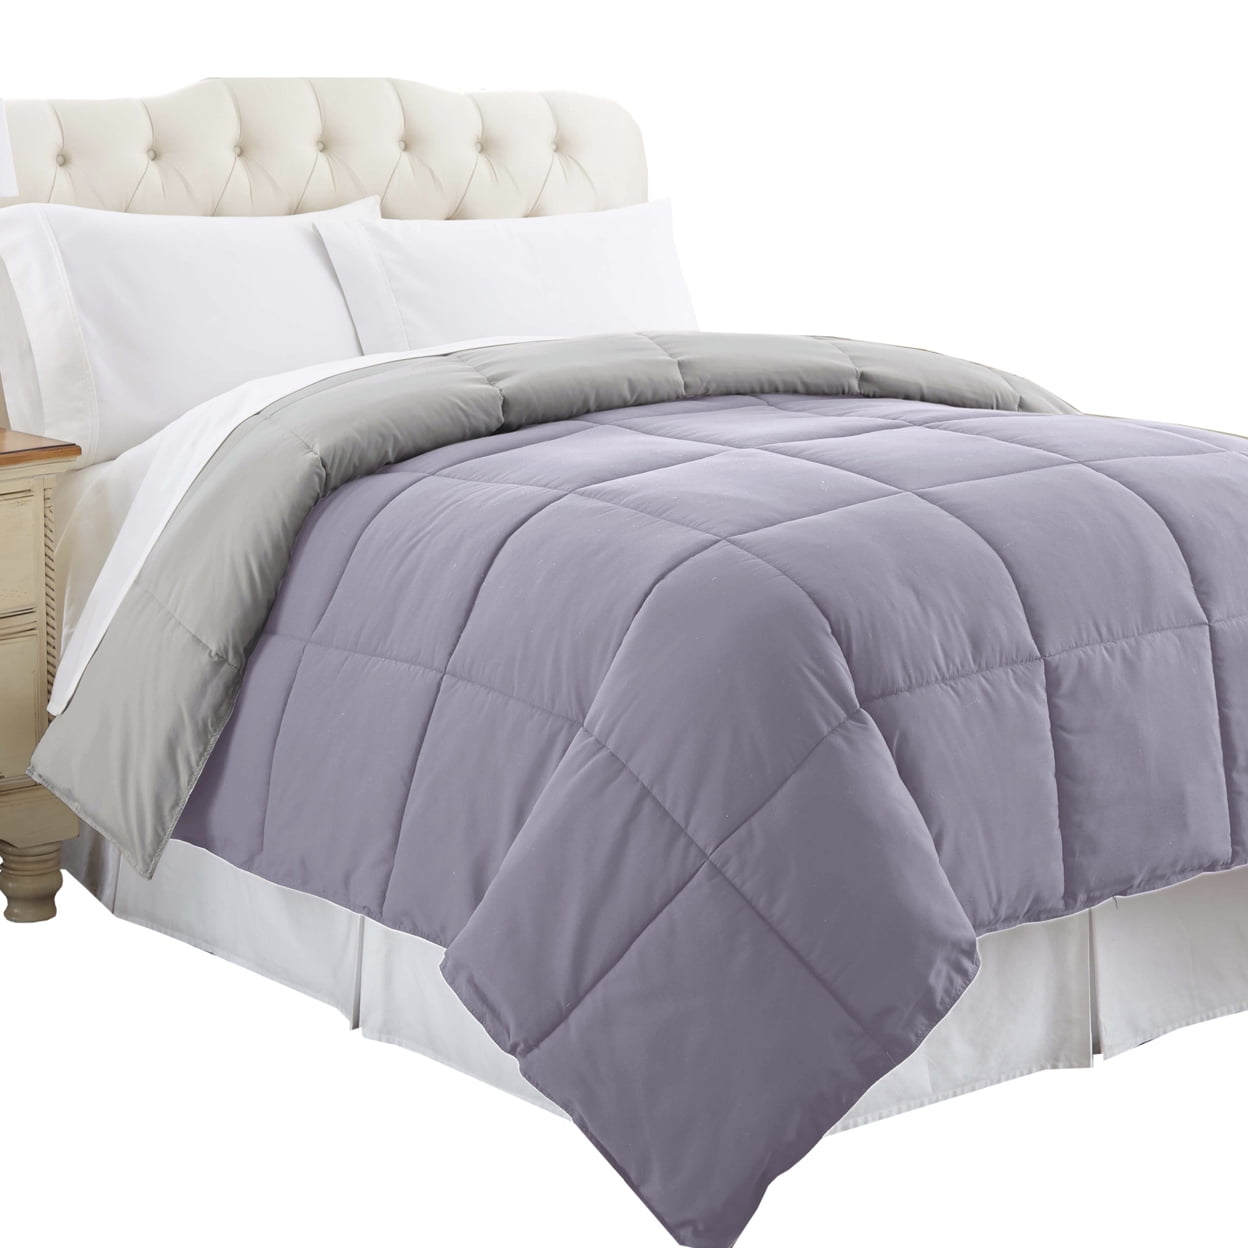 Bm202059 Genoa King Size Box Quilted Reversible Comforter, Purple & Gray